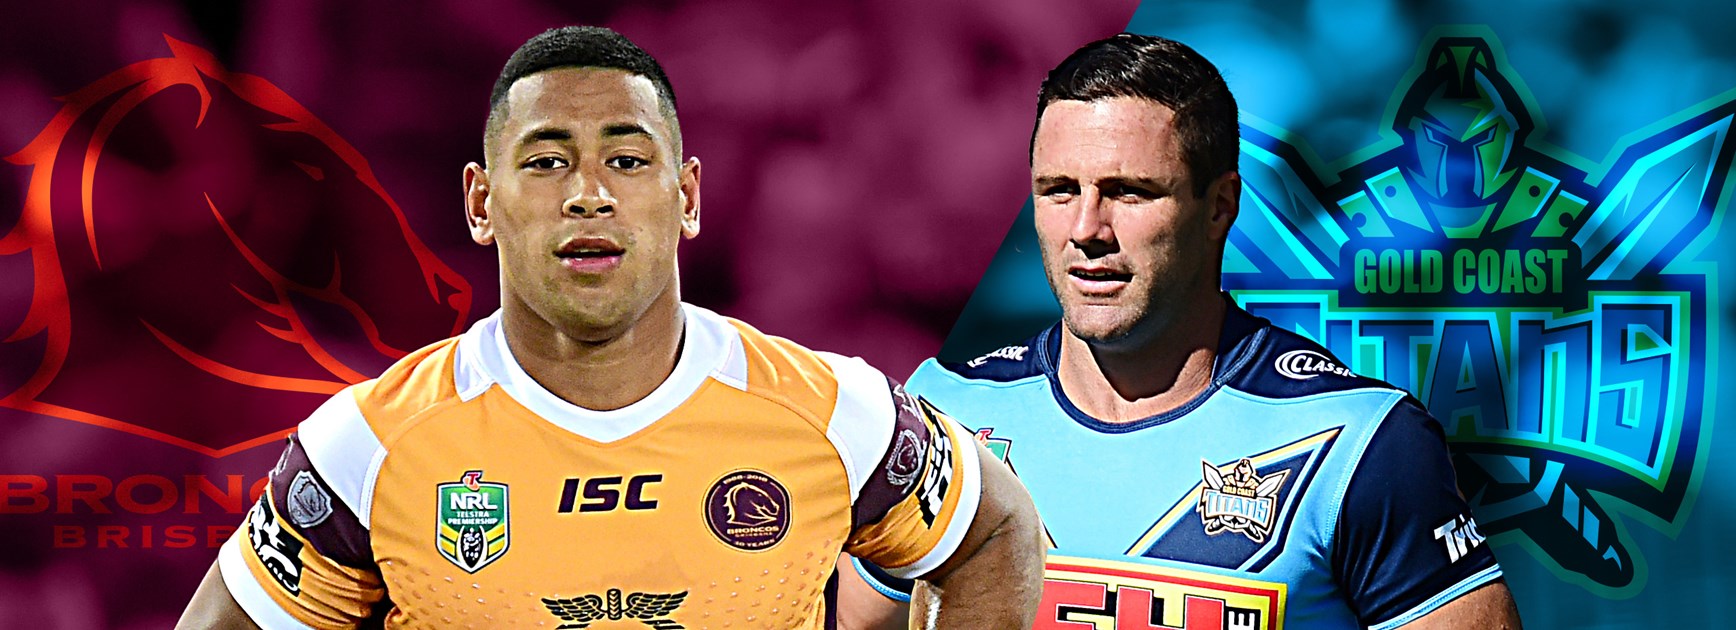 Broncos v Titans: Sims to start, Cartwright benched